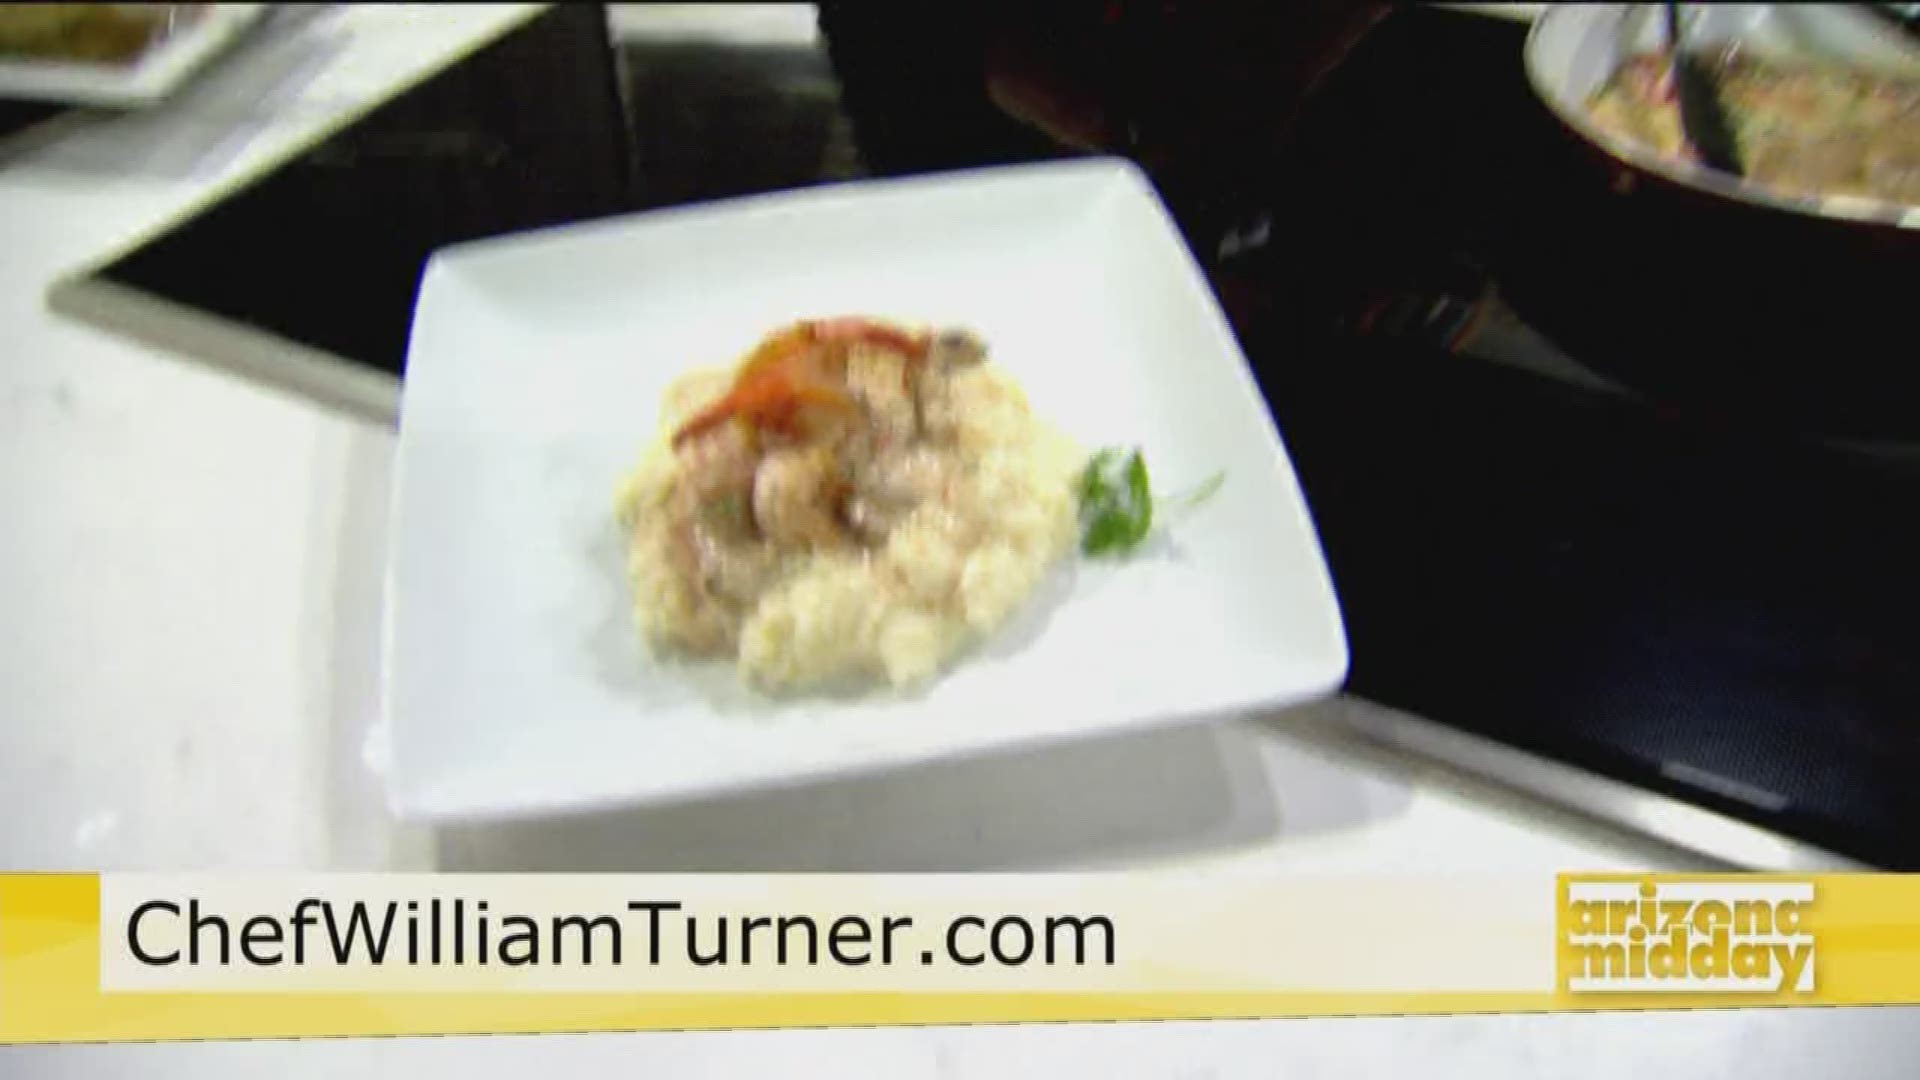 Chef William Turner demonstrates how to make Shrimp and Grits to impress a mom with a love for Southern food.